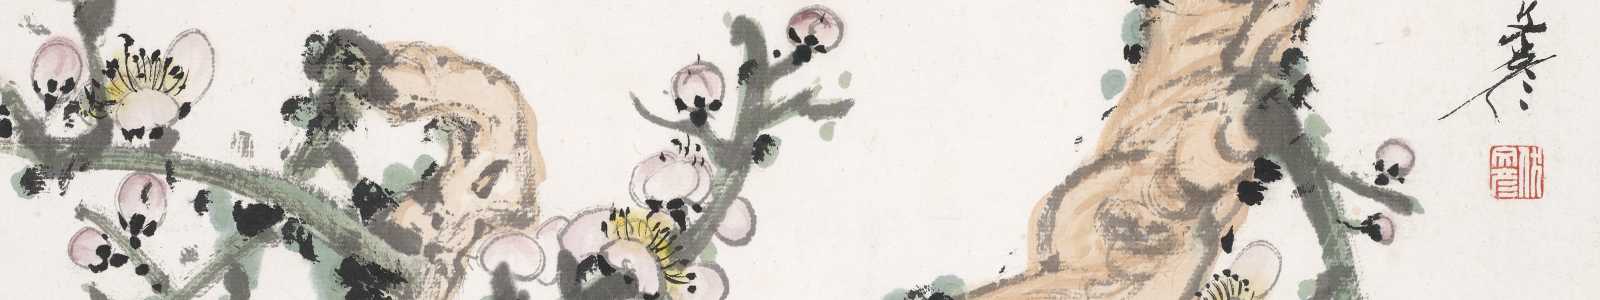 Summer Reverie: Chinese Paintings Online including the Collection of Zhang Xinjia